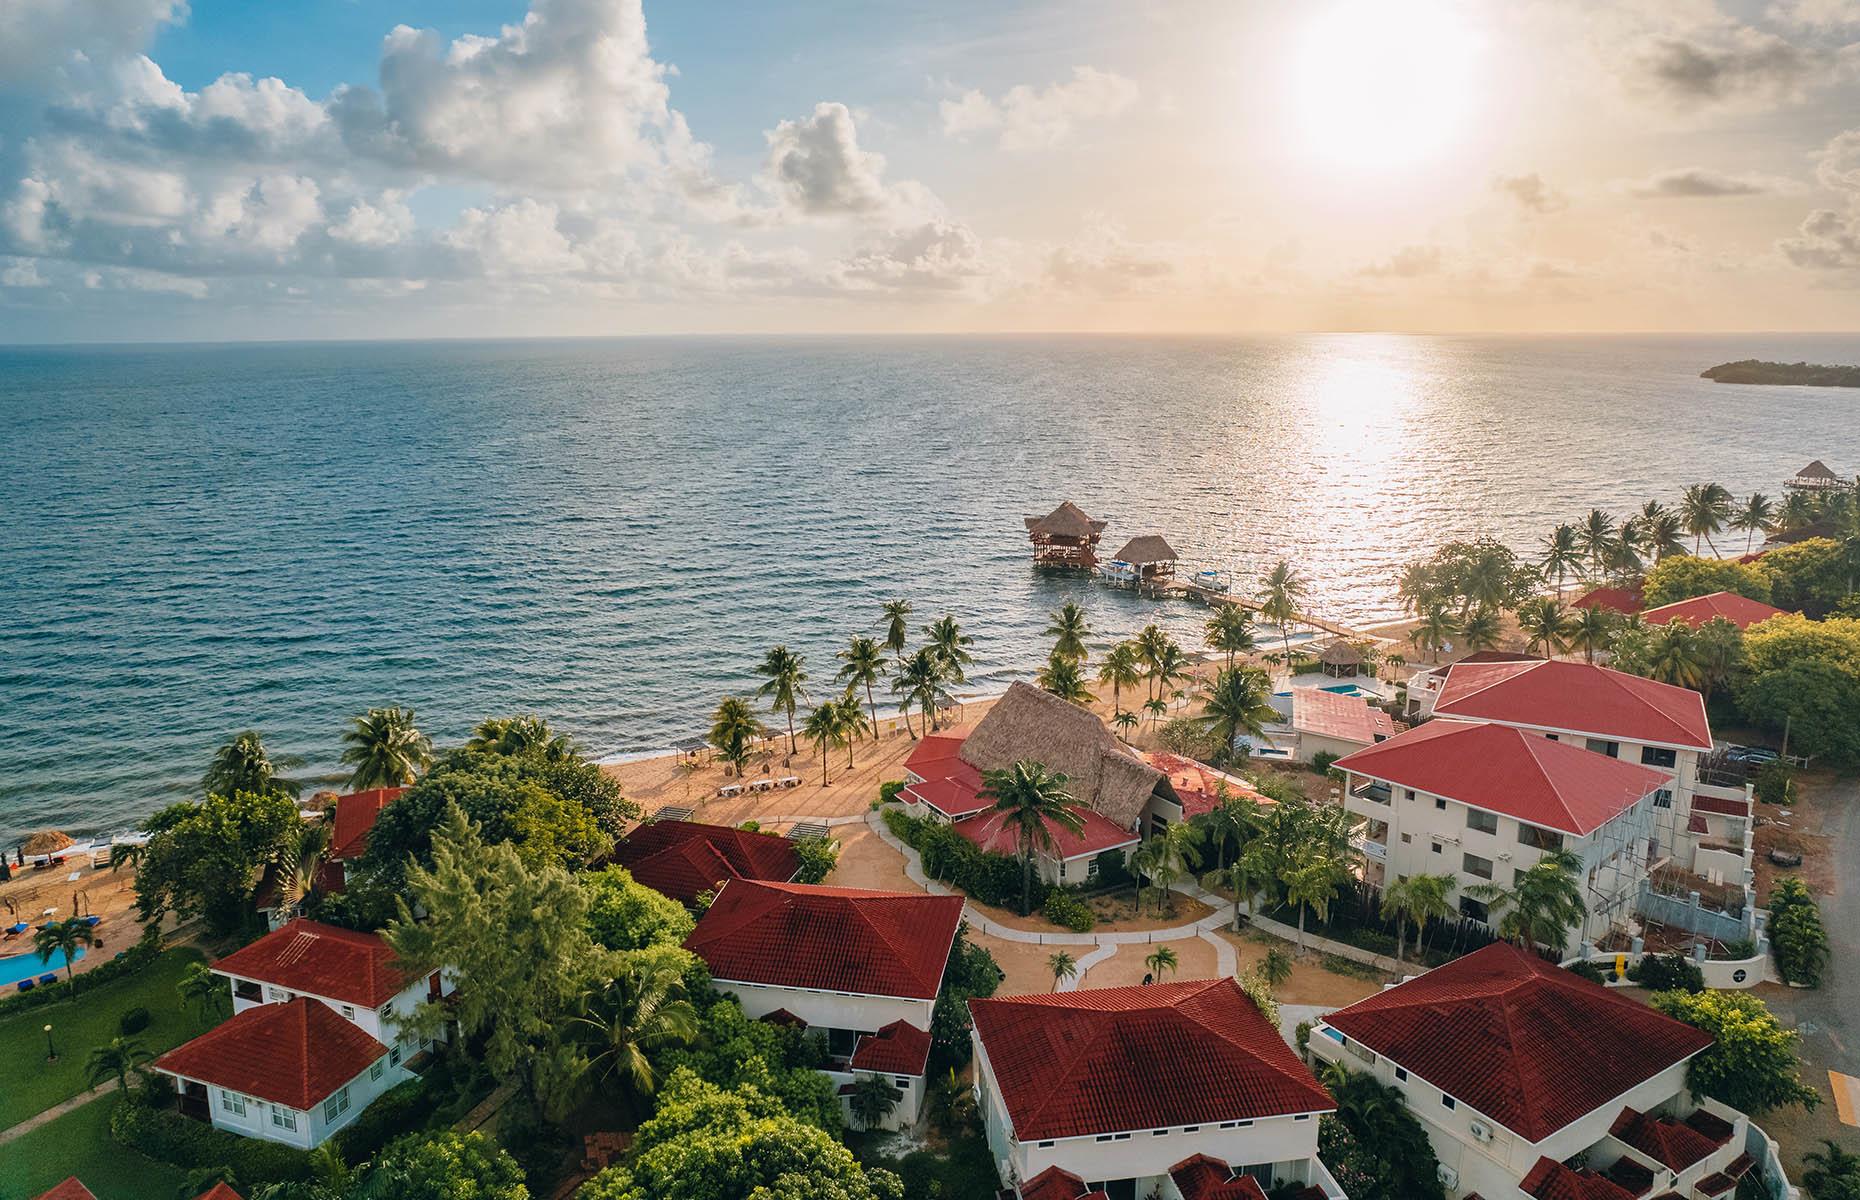 <p>The sprawling mega-resorts of Florida and Dubai aren't really Belize's style, but there's still a great range of high-end stays that offer more personalized luxury. In San Ignacio, in the thick forests of the Belizean interior, the <a href="https://www.kaanabelize.com/">Ka'ana Resort's</a> string of lavish villas and suites provide the perfect springboard for nature and adventure. In Hopkins, a blend of culture and coast, the <a href="https://jaguarreefbelize.com/">Lodge at Jaguar Reef</a> offers an over-the-sea bar and private plunge pools, and hosted Prince William and Kate Middleton in their Seafront Suite in 2022. And in Placencia, beach haven and gateway to the Caribbean, the <a href="https://www.itzanabelize.com/">Itz'ana Resort</a> serves up sumptuous spa treatments and three-course dinners on the beach.</p>  <p><strong>Liked this? Click on the Follow button above for more great stories from loveEXPLORING</strong></p>  <p><a href="https://www.loveexploring.com/galleries/190680/the-caribbeans-most-beautiful-places-you-need-to-explore?page=1"><strong>Now discover more of the most beautiful places in the Caribbean</strong></a></p>